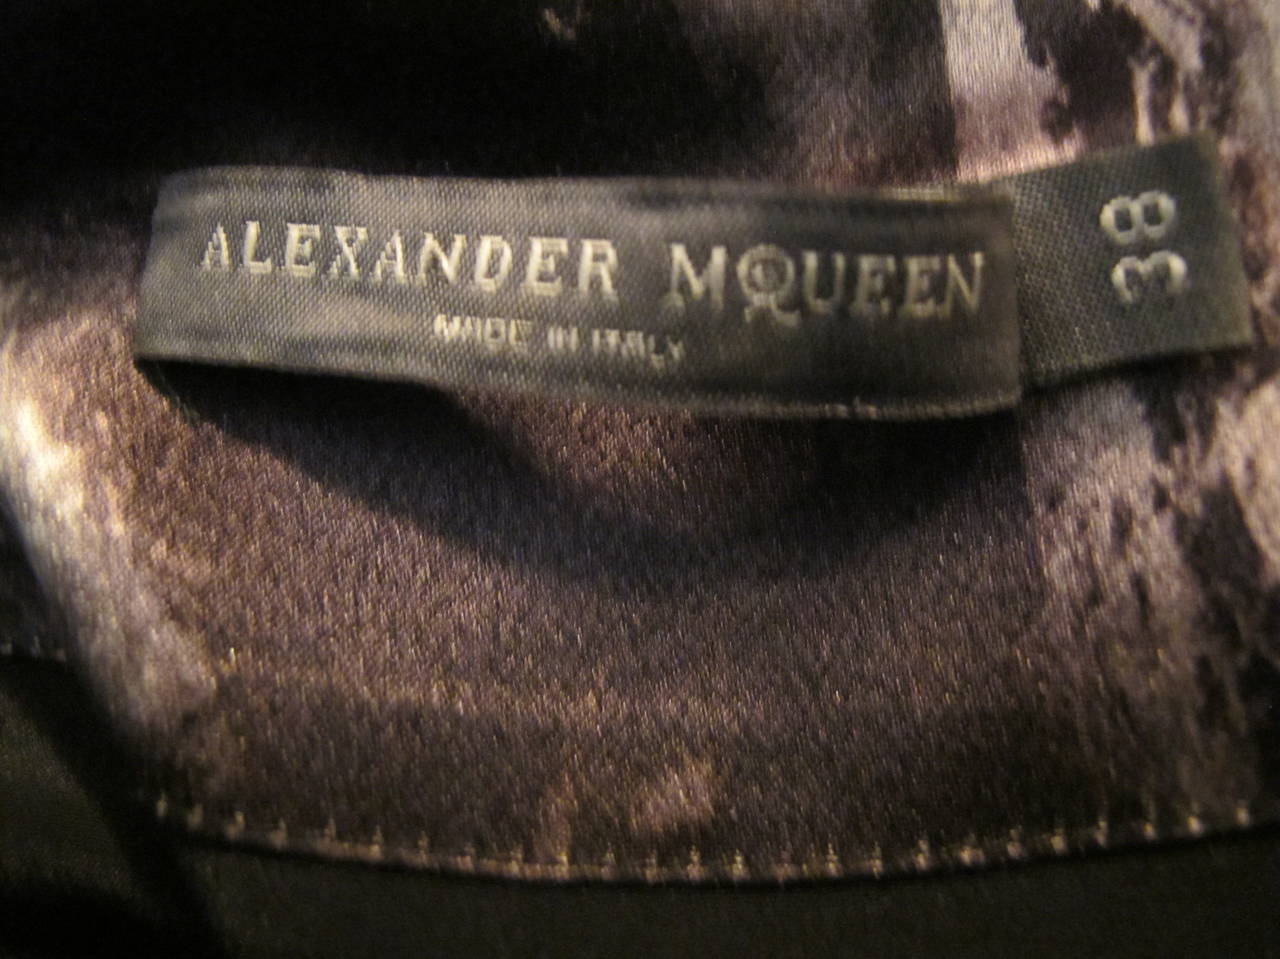 2010 Alexander McQueen Collectable Silk Evening Gown For Sale 4